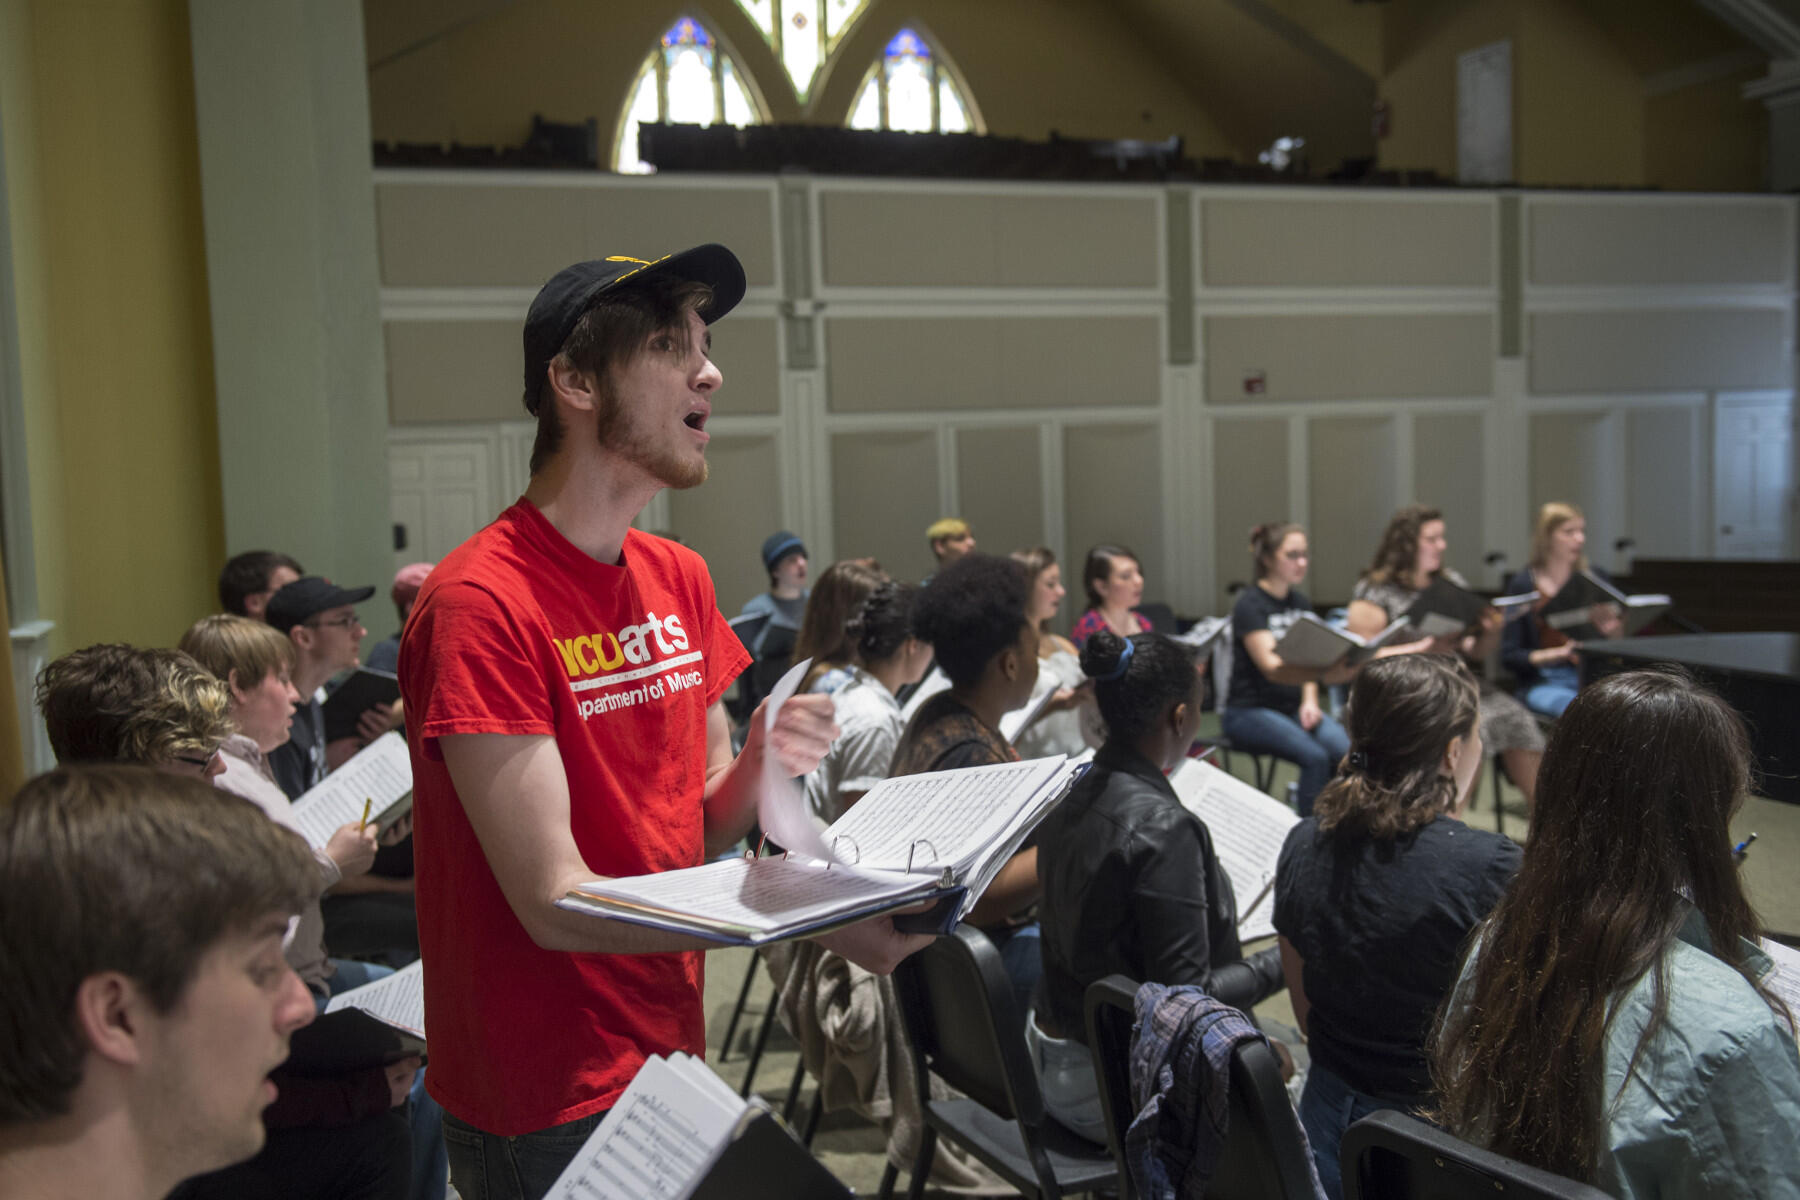 VCU student Trevor White rehearses a solo during a piece titled "Hot Dogs" that will be performed at Friday's concert.